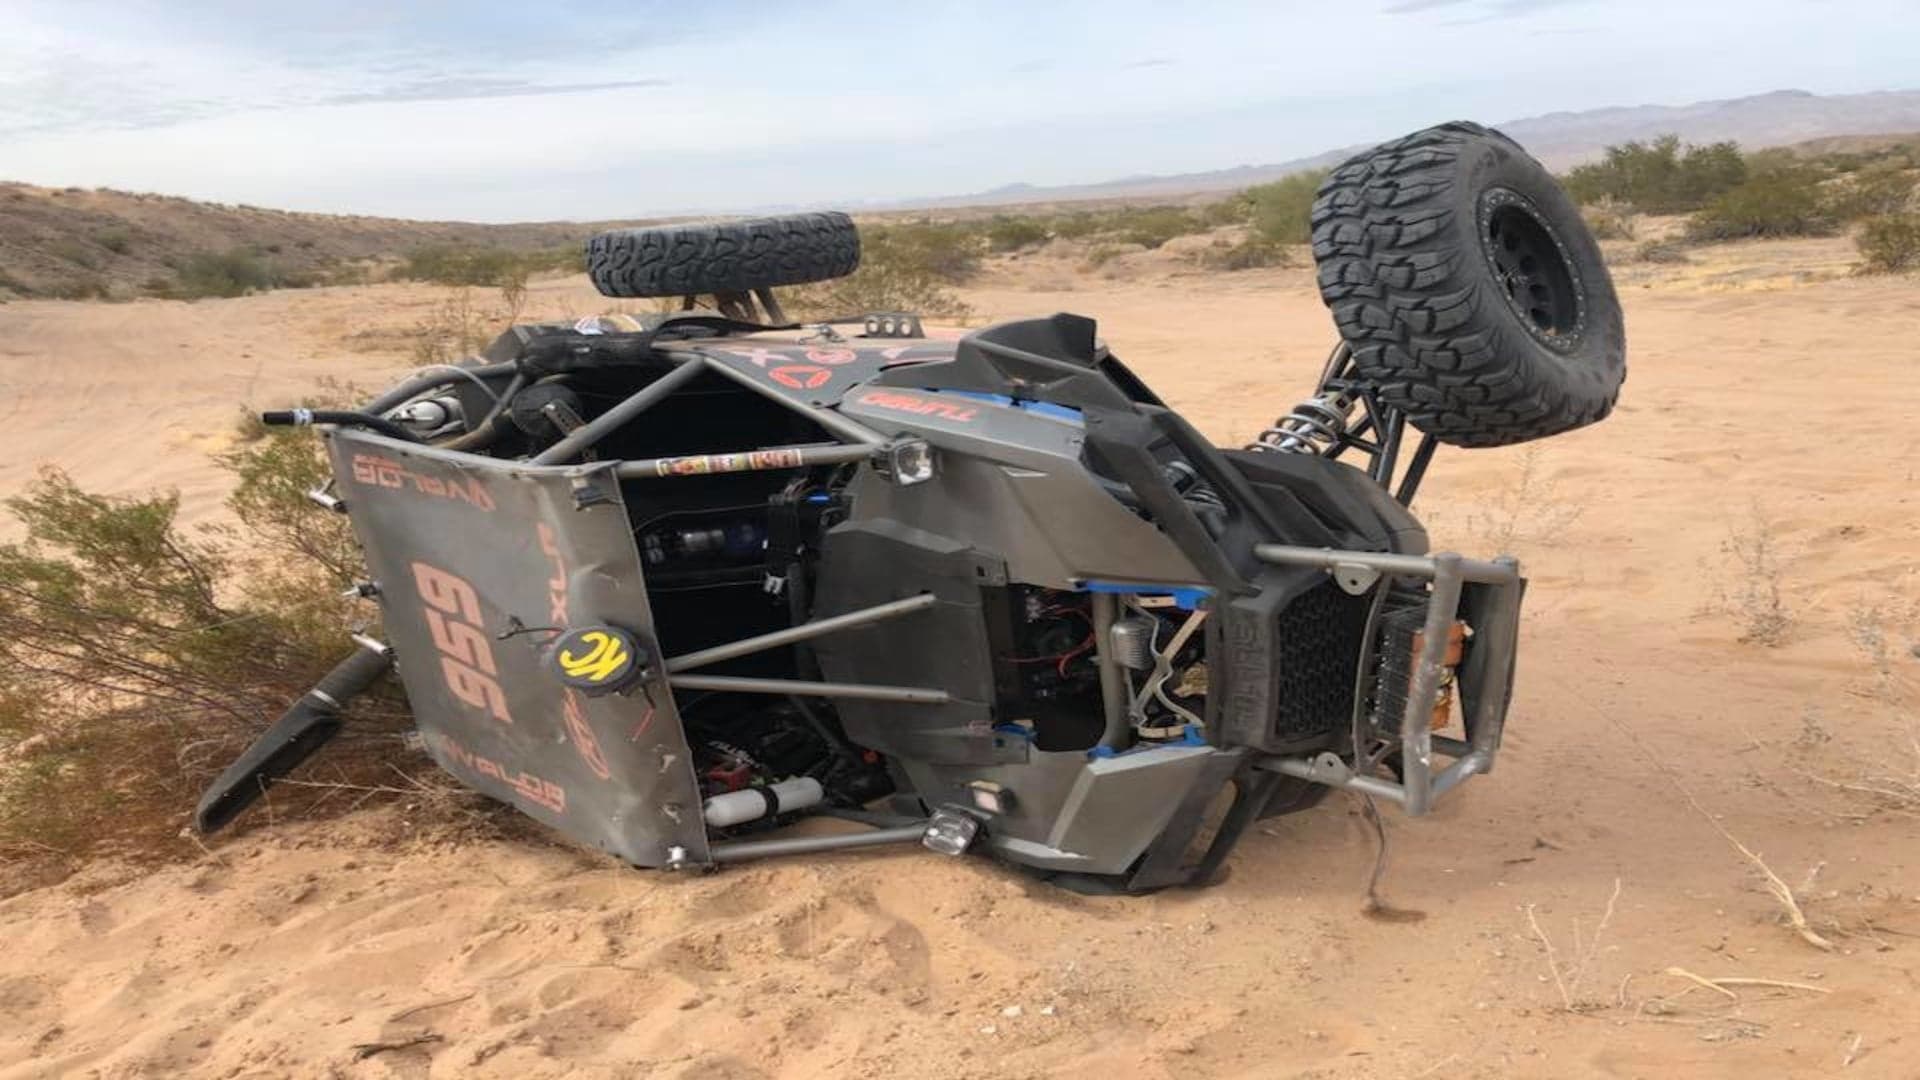 Watch The Footage of Valor Racing’s Polaris RZR Tumbling Out of the Parker 250